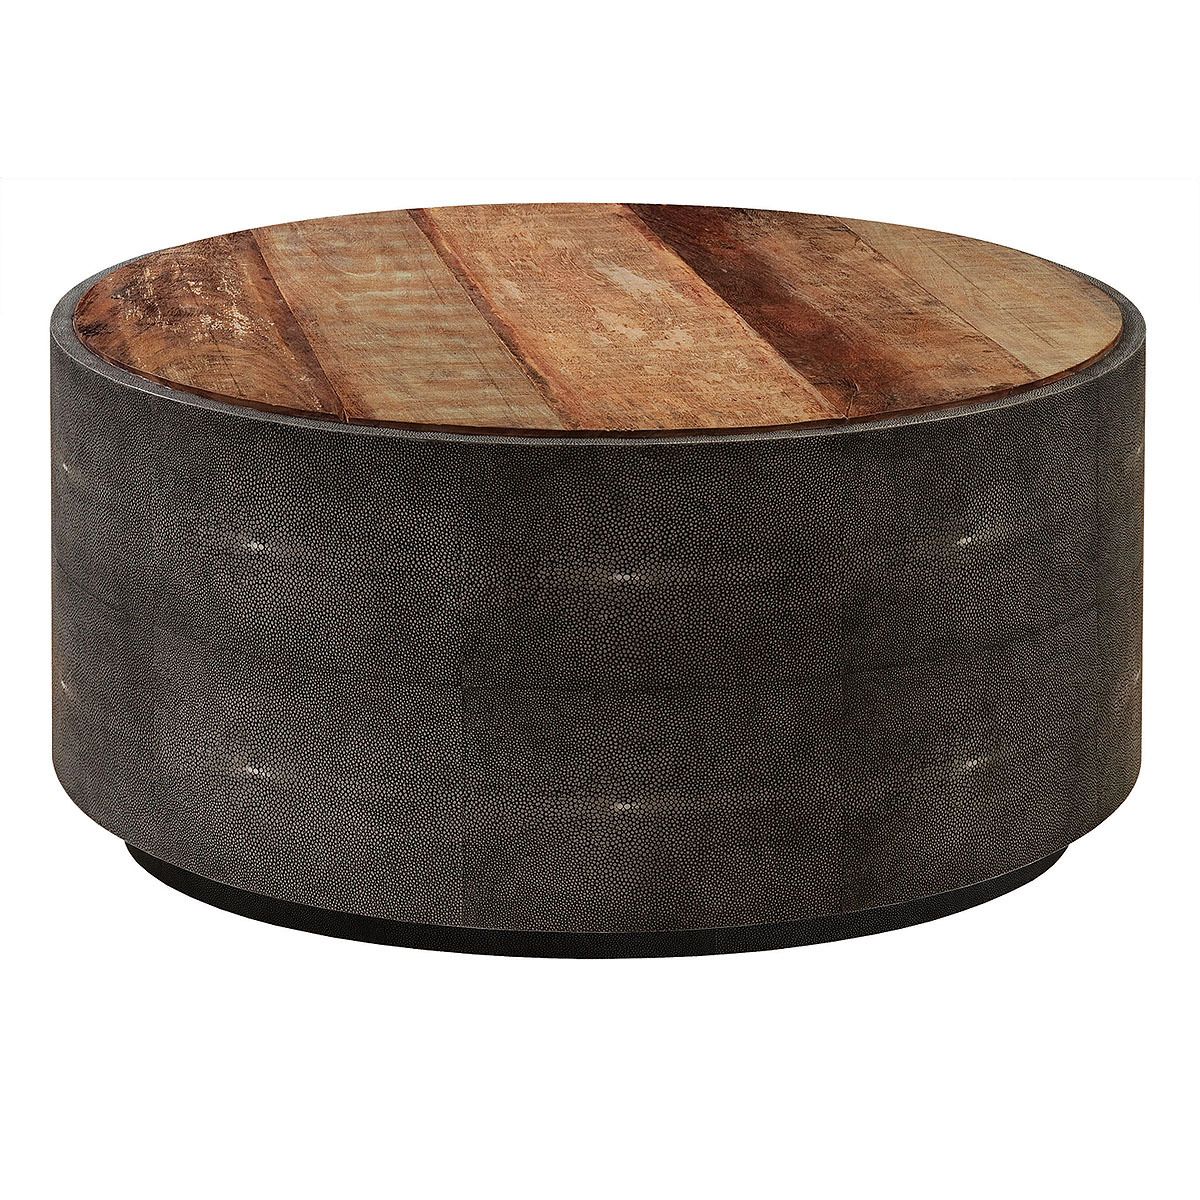 Reclaimed Wood Crosby Round Coffee Table Wooden Round Coffee Table (View 3 of 10)